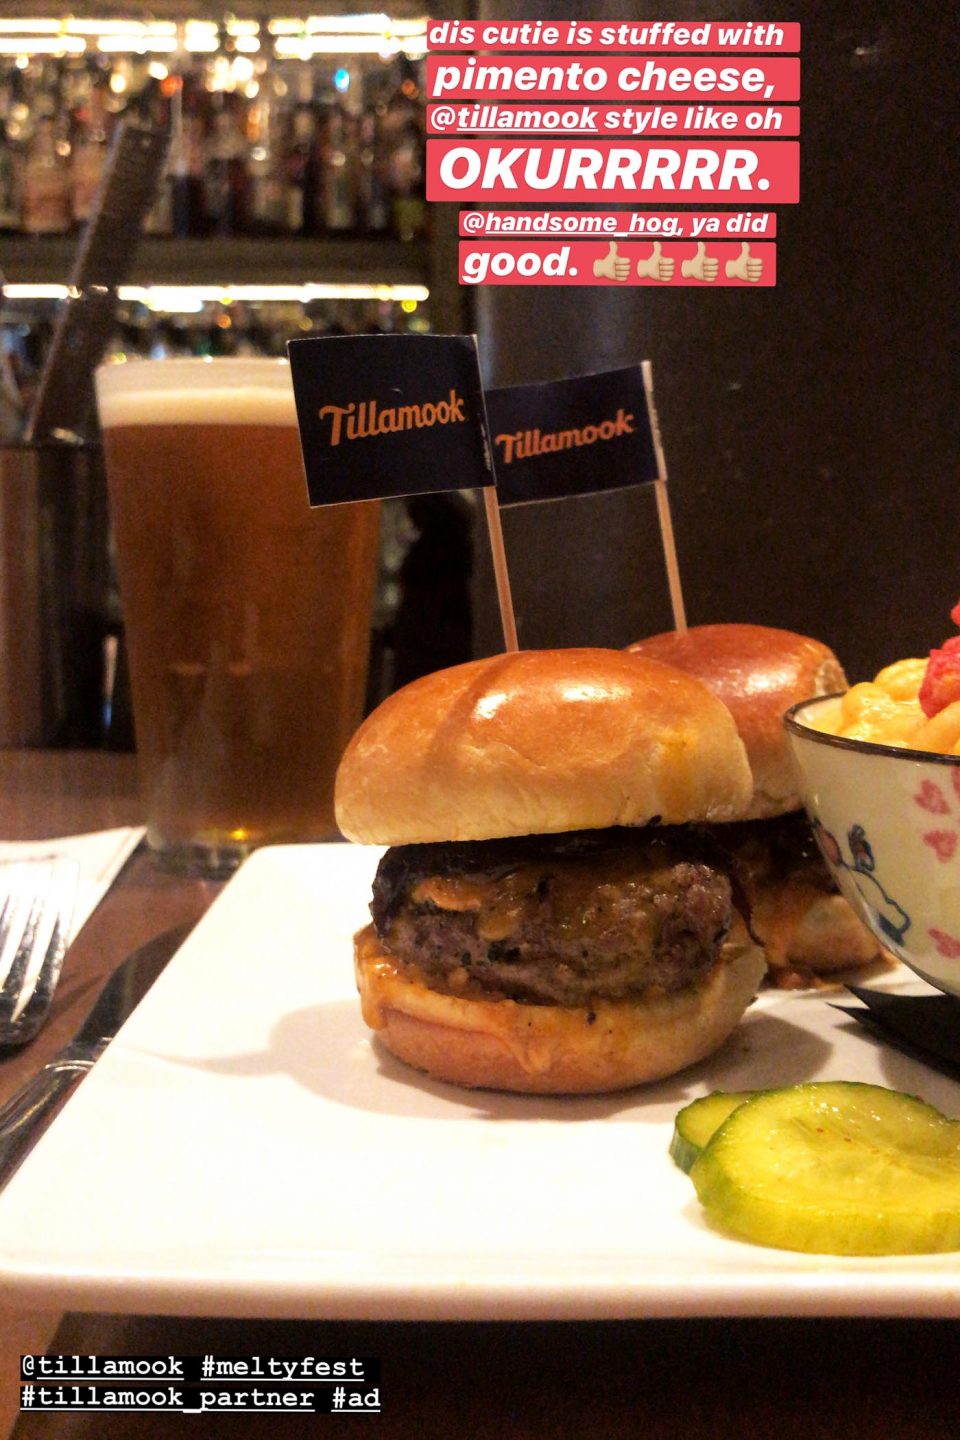 Mini cheeseburger on a plate with mini blue flag that says "Tillamook" coming out of it.